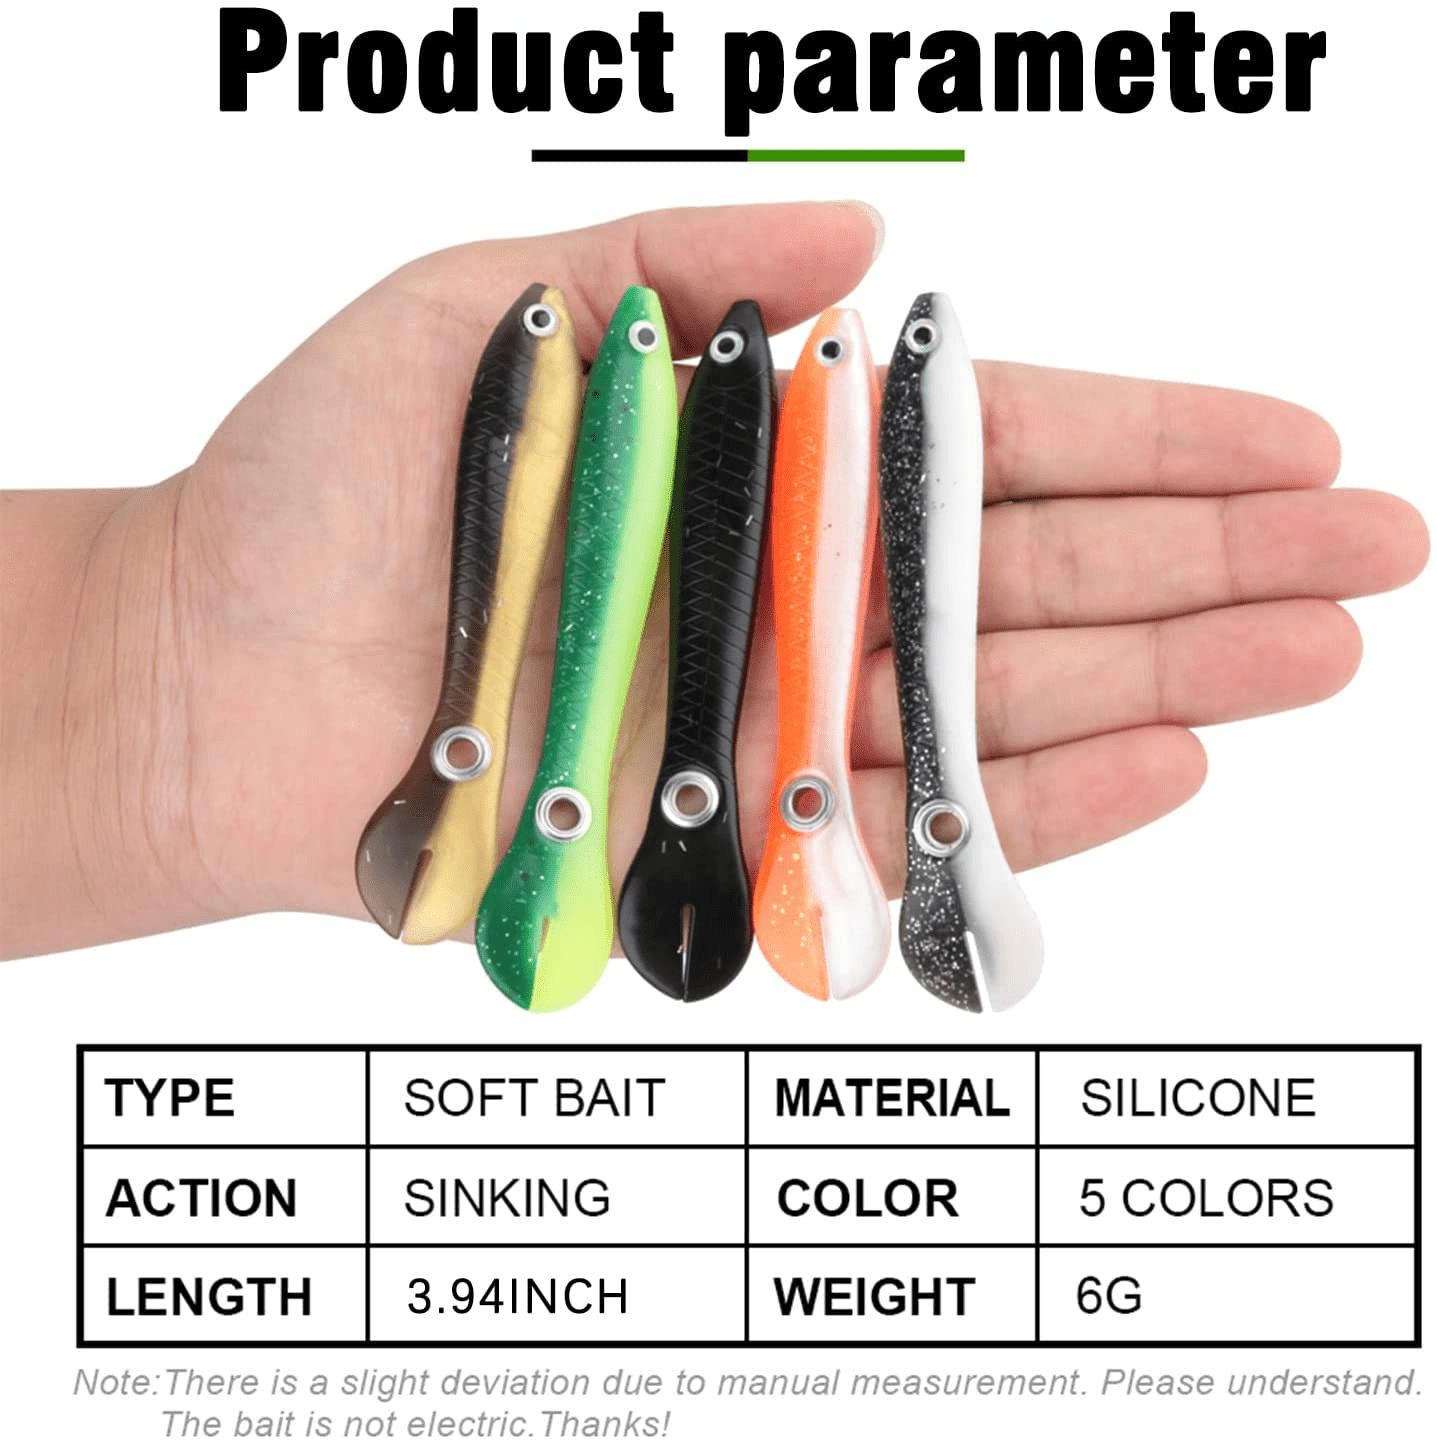 10Pcs Soft Bionic Fishing Lure,Bionic Fishing Lure for Saltwater & Freshwater, Creative Realistic Finshing Lure Fishing Accessory,Mock Lure Can Bounce,Suitable for Fishing Lovers Outdoor